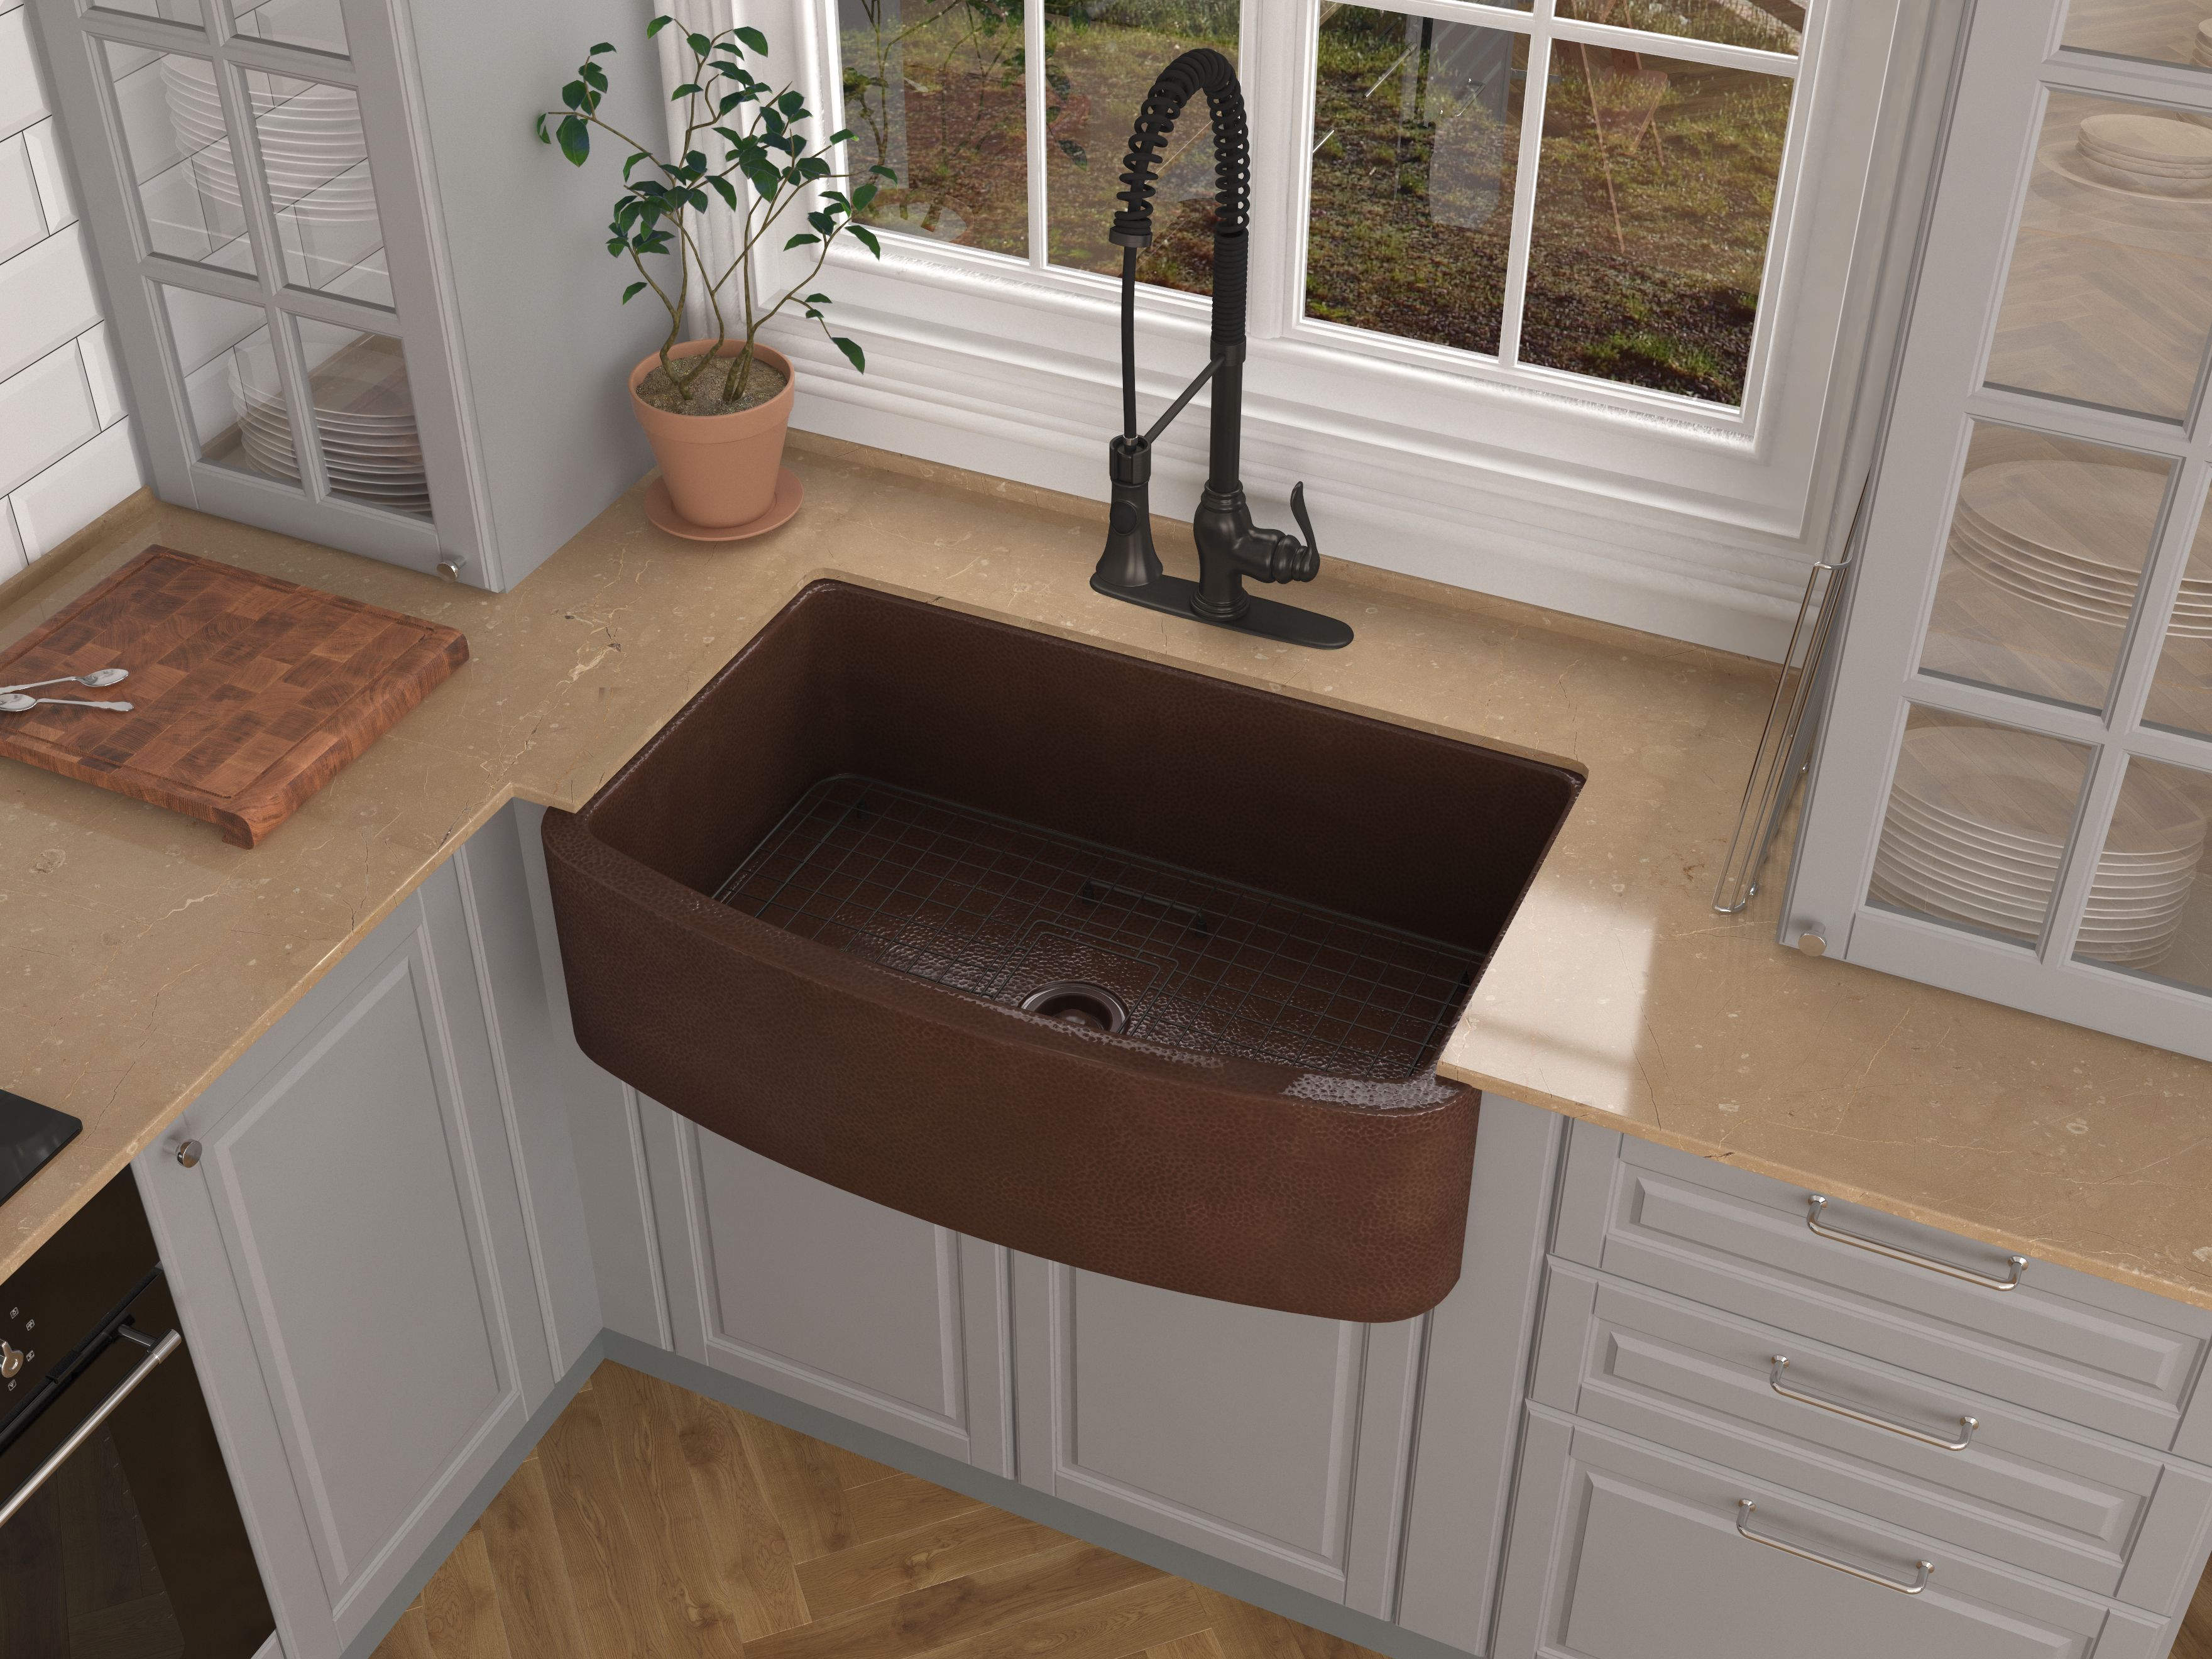 Pieria Farmhouse Handmade Copper 33 in. 0-Hole Single Bowl Kitchen Sink in Hammered Antique Copper - image 3 of 9